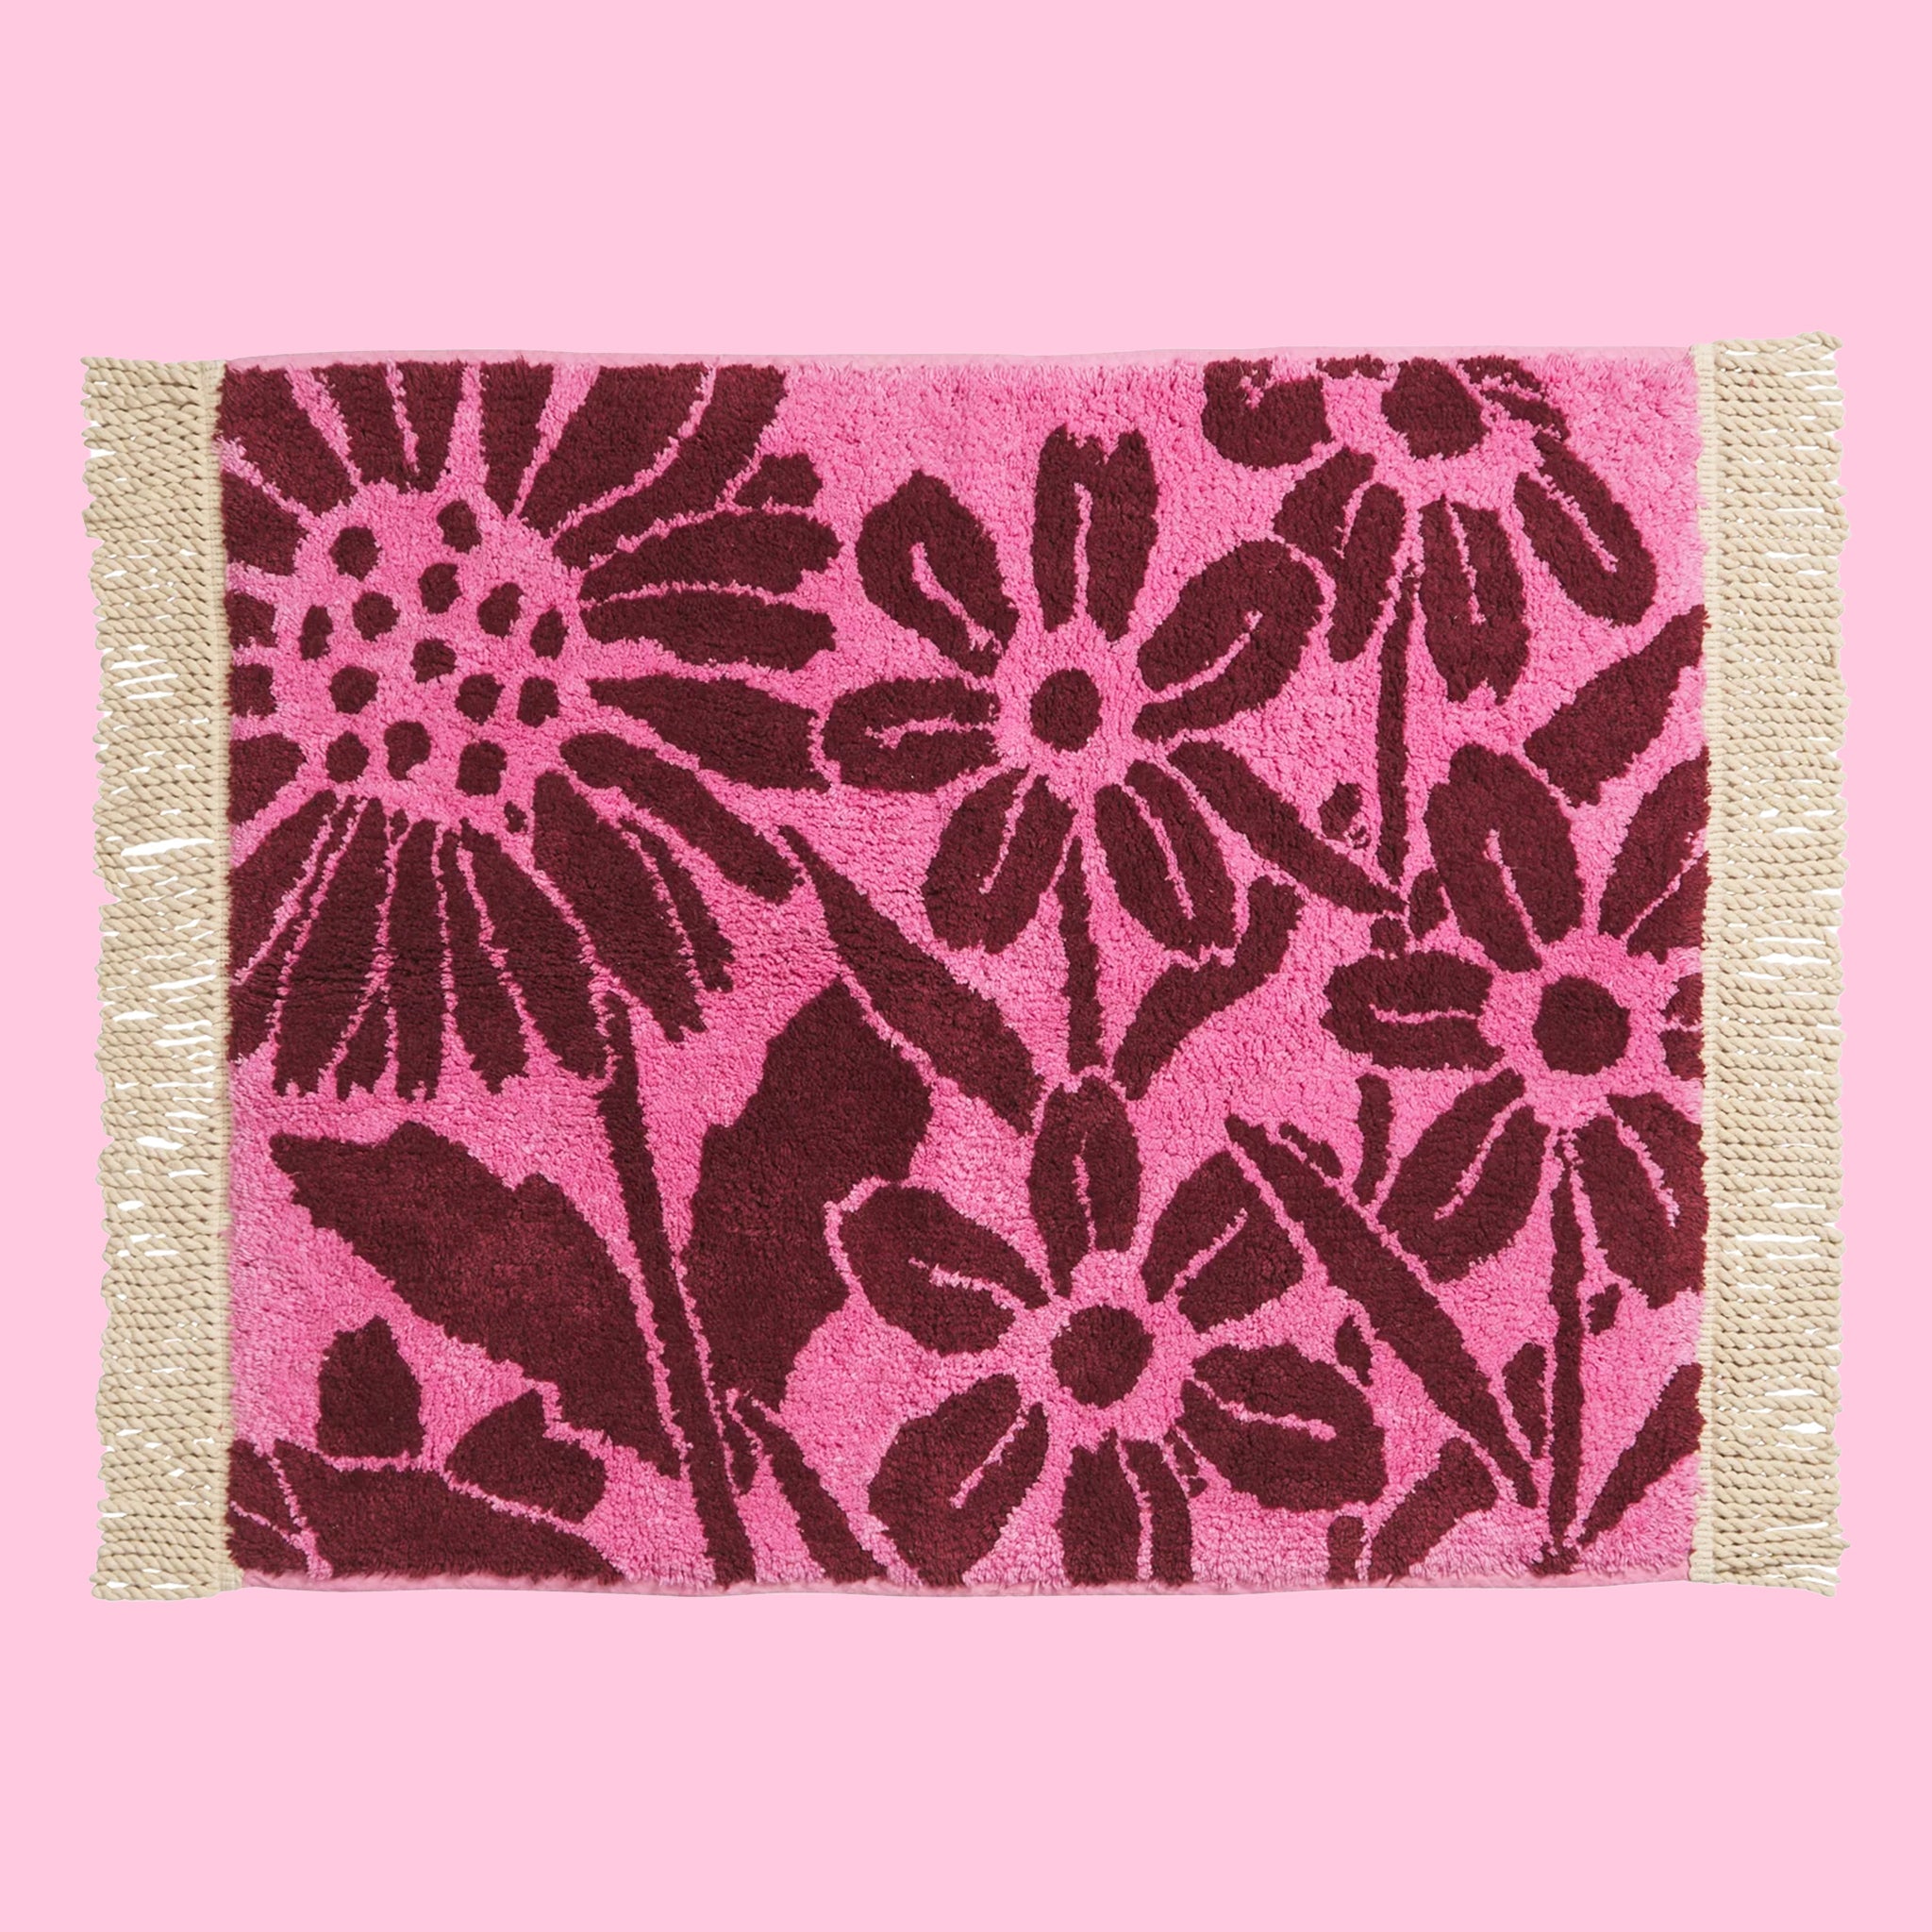 A pink and dark burgundy floral print bath mat with twist fringe details on two ends.